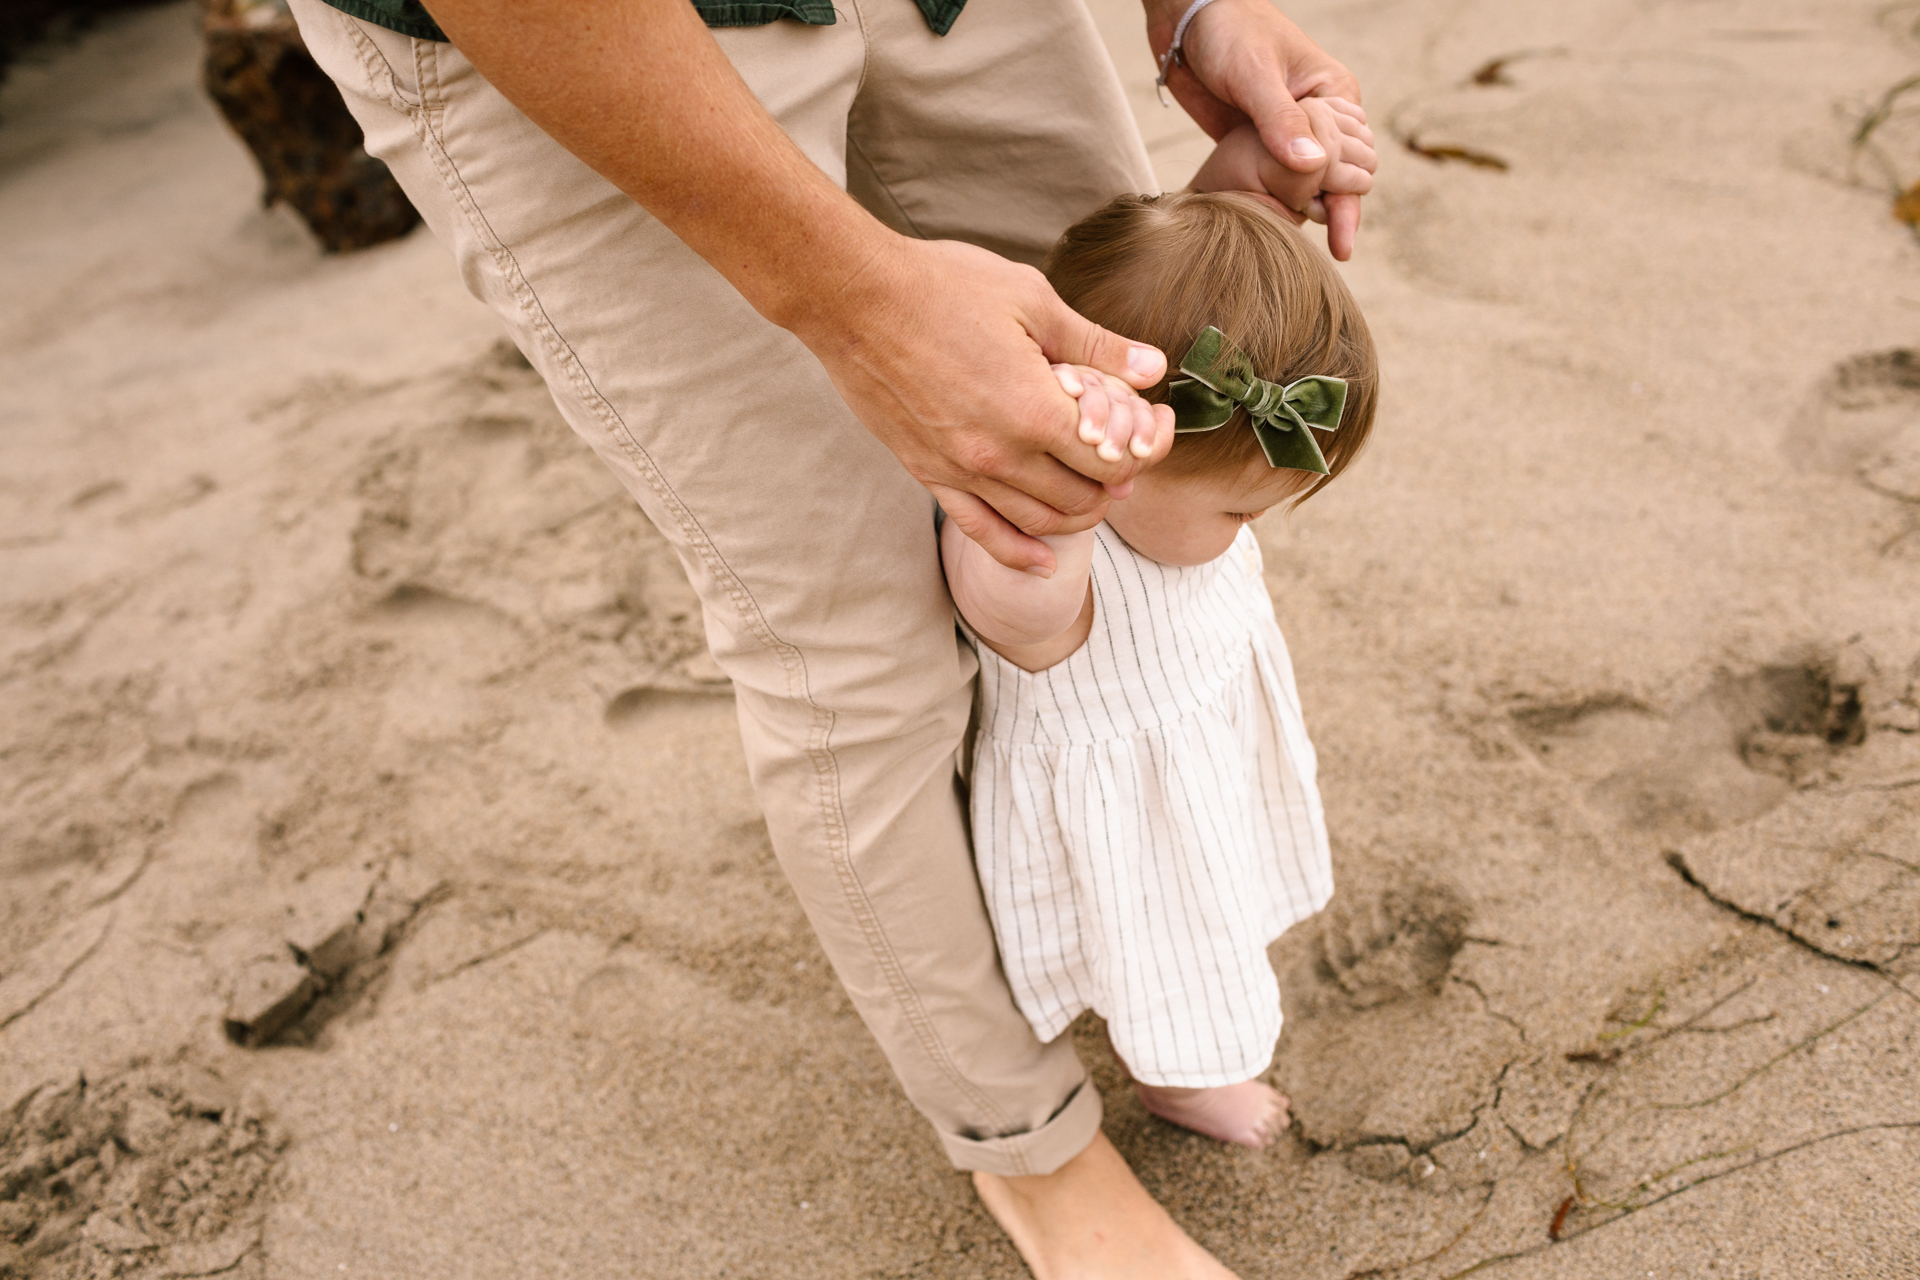 baby walking on sand holding dad's hand